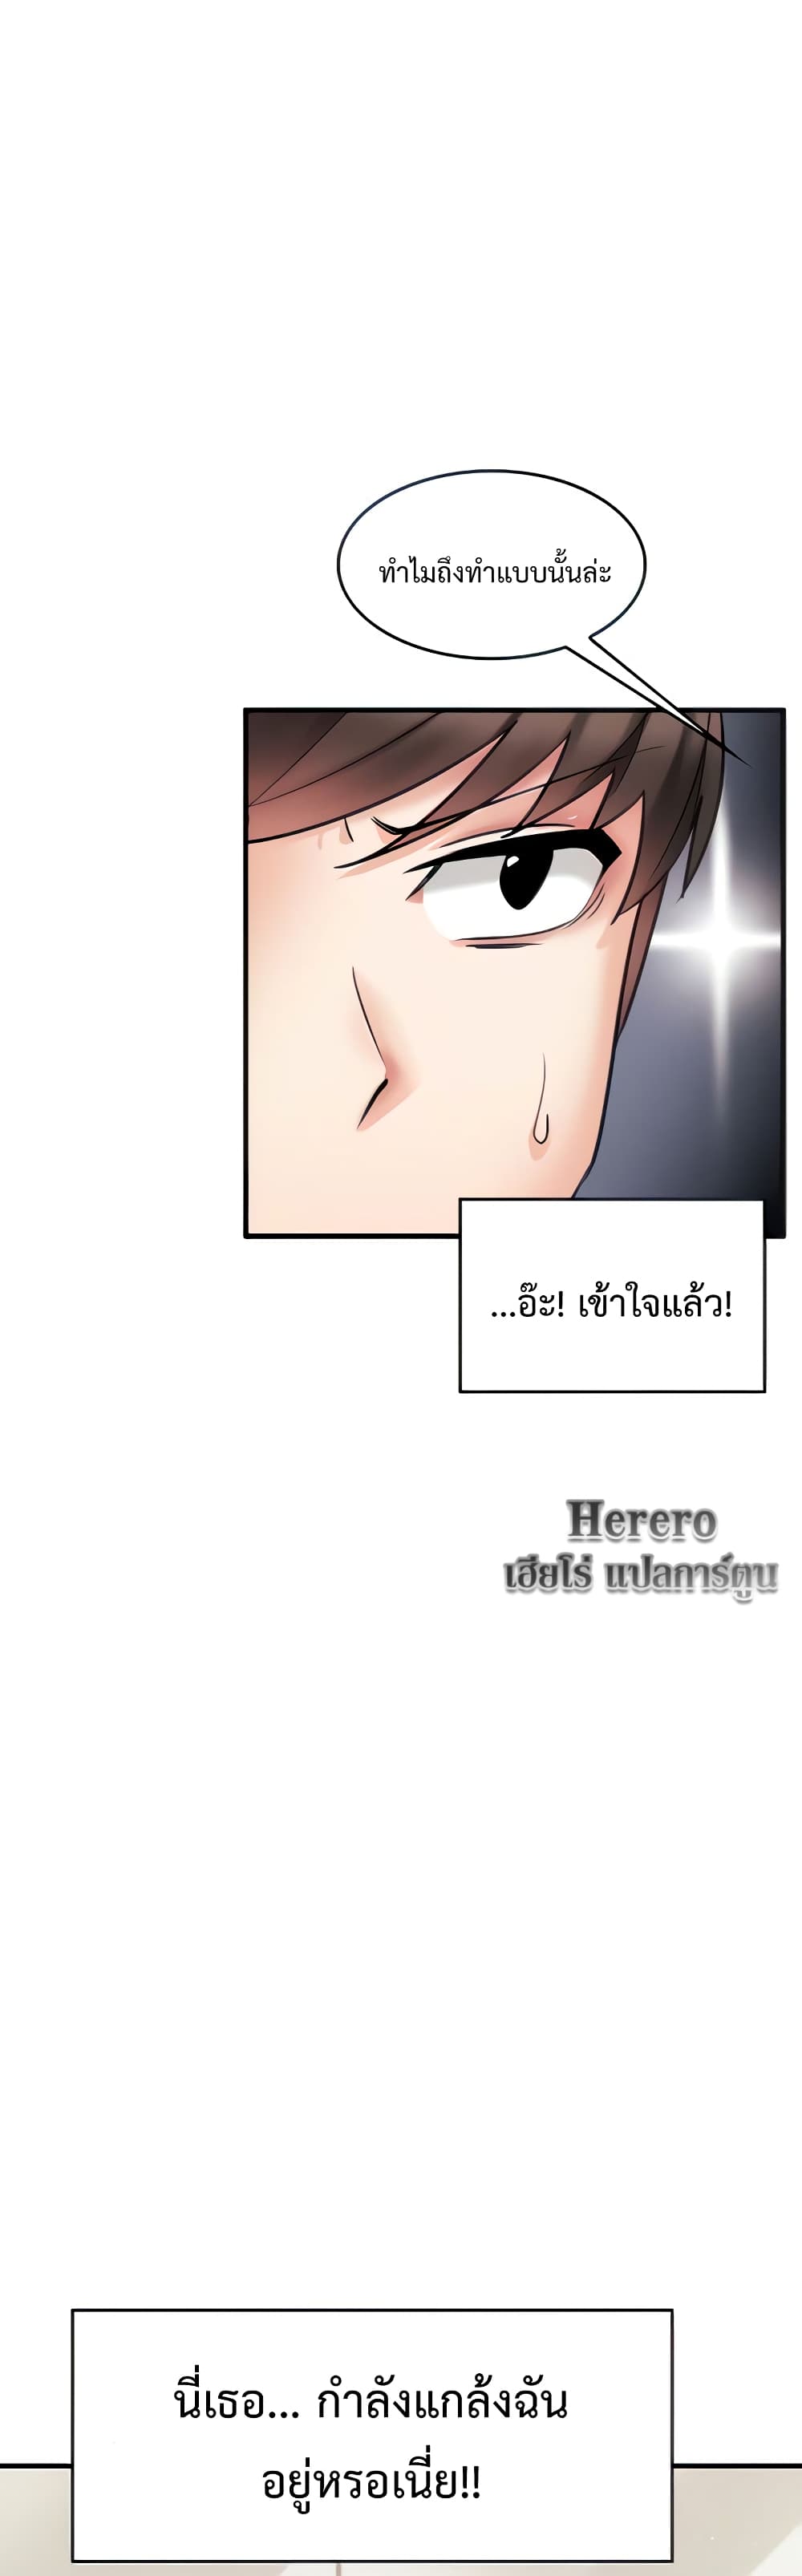 Relationship Reverse Button: Let’s Make Her Submissive 2 ภาพที่ 2